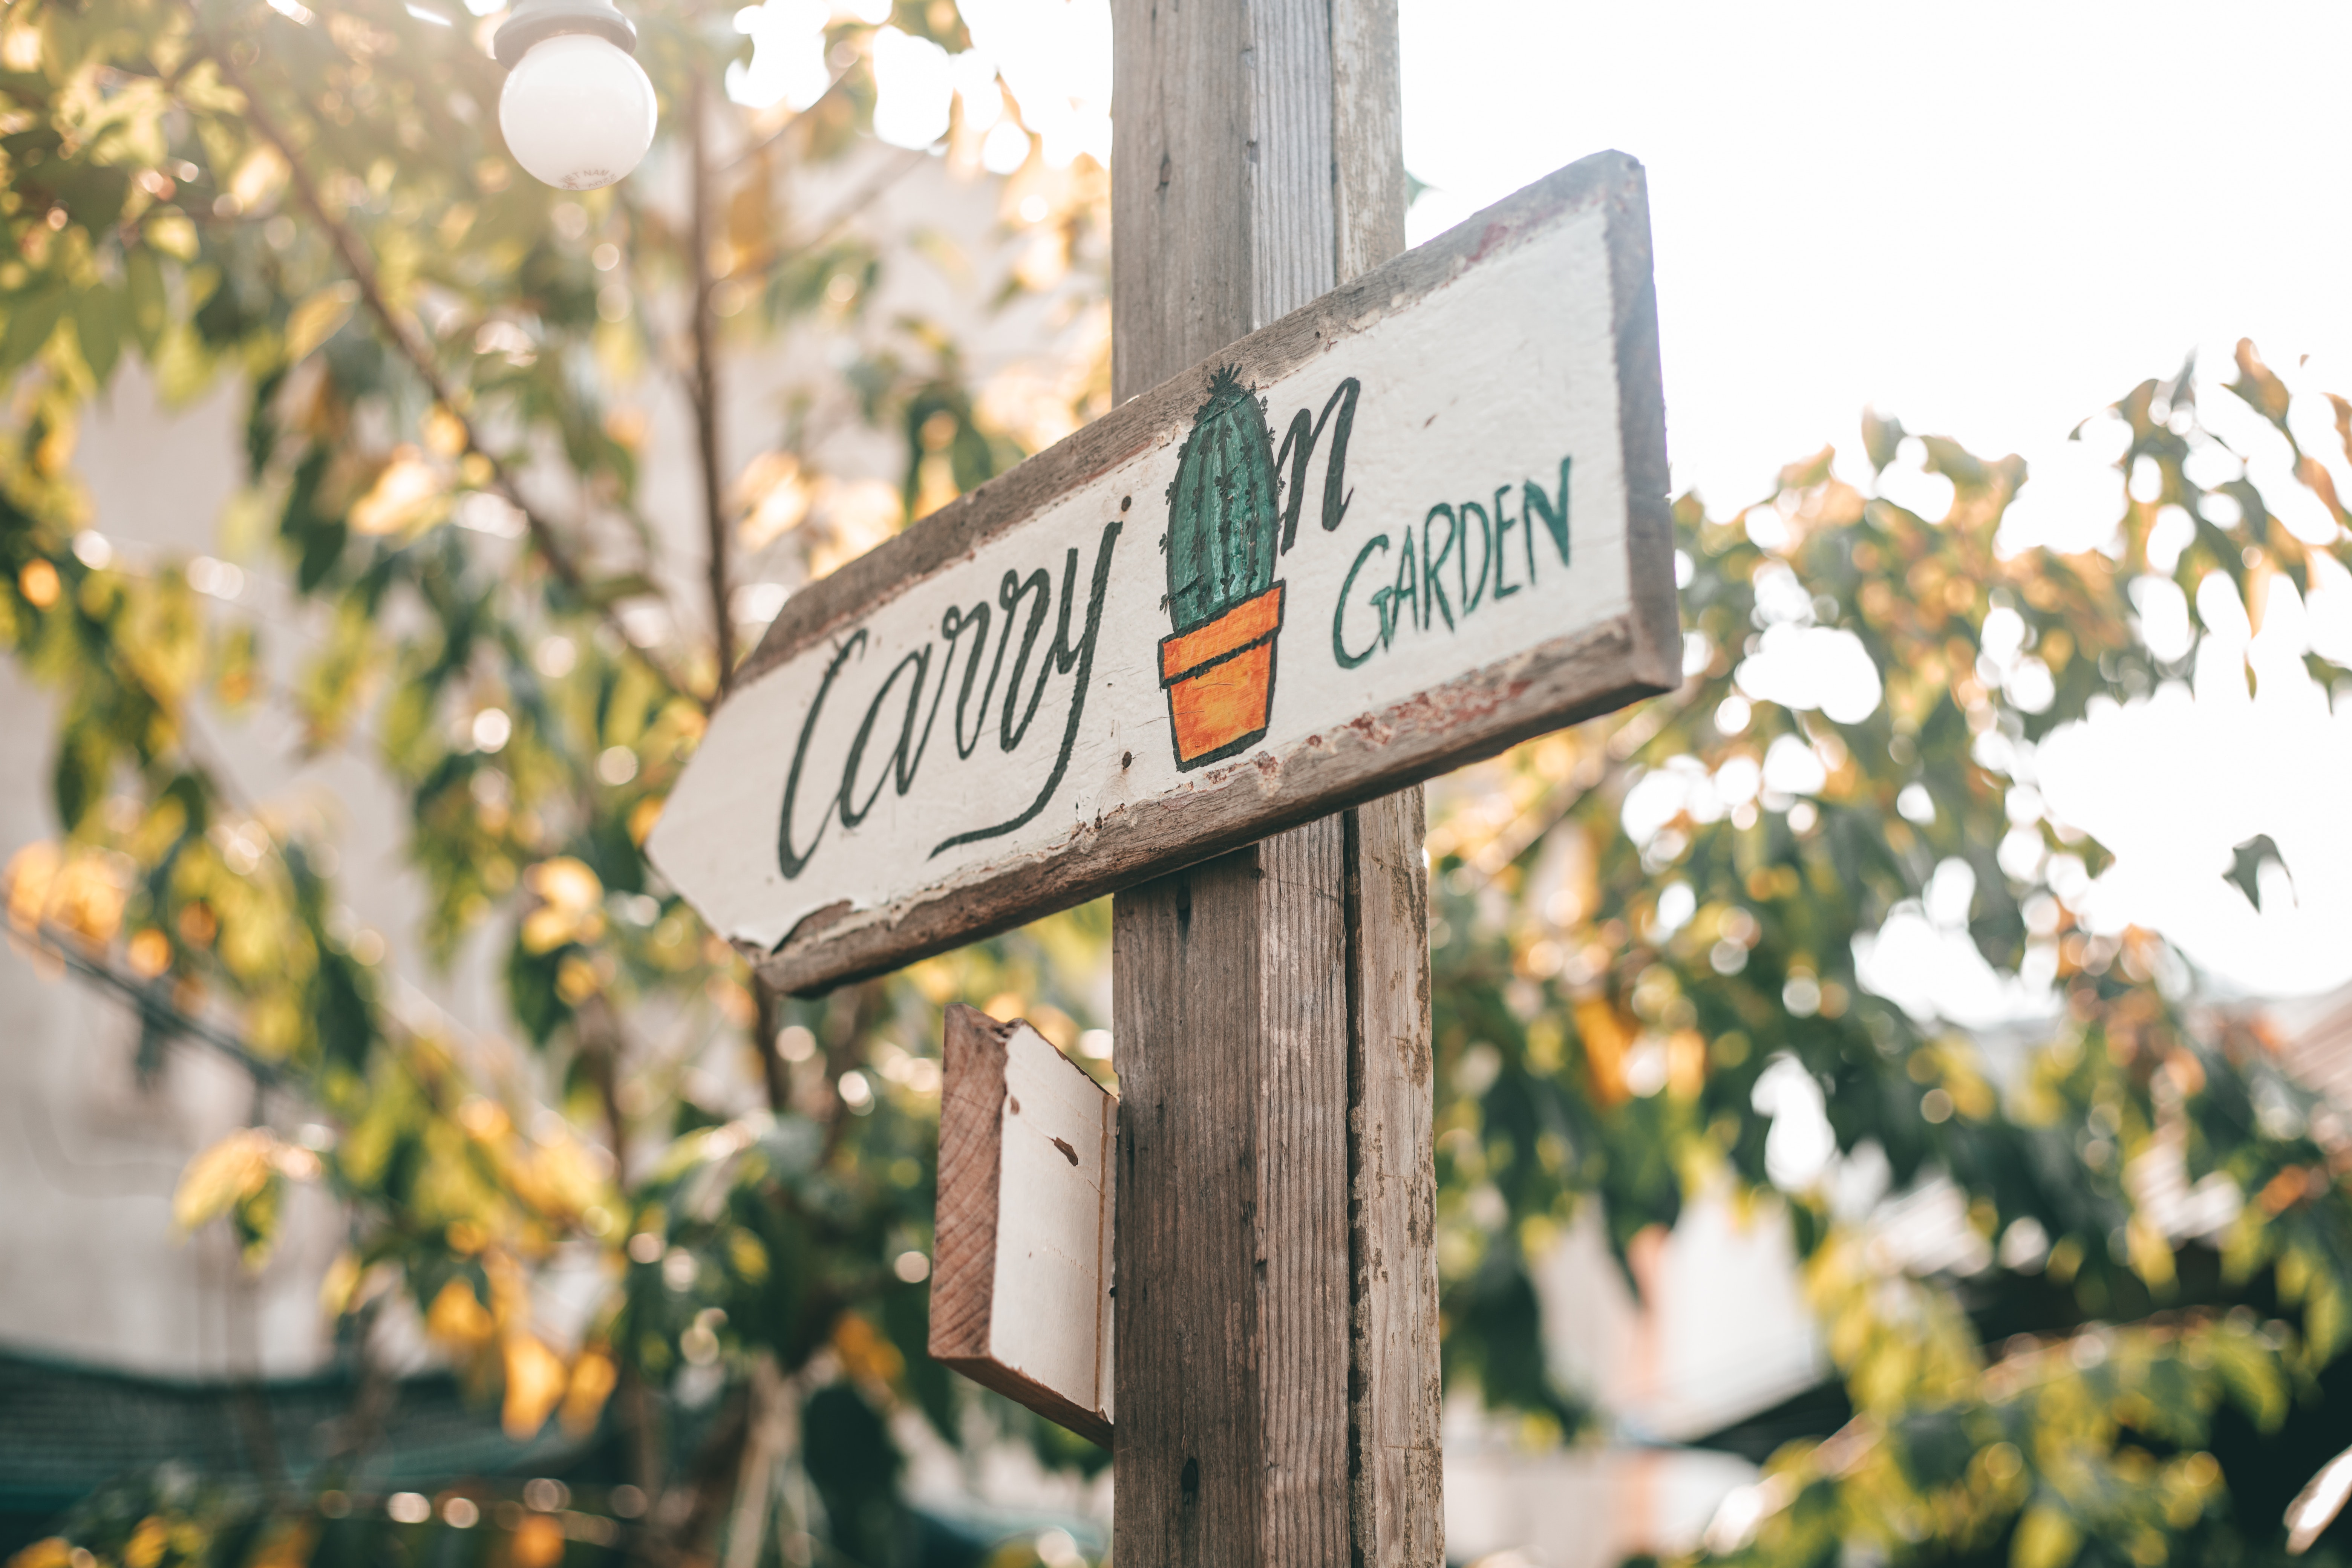 Carry on garden signage